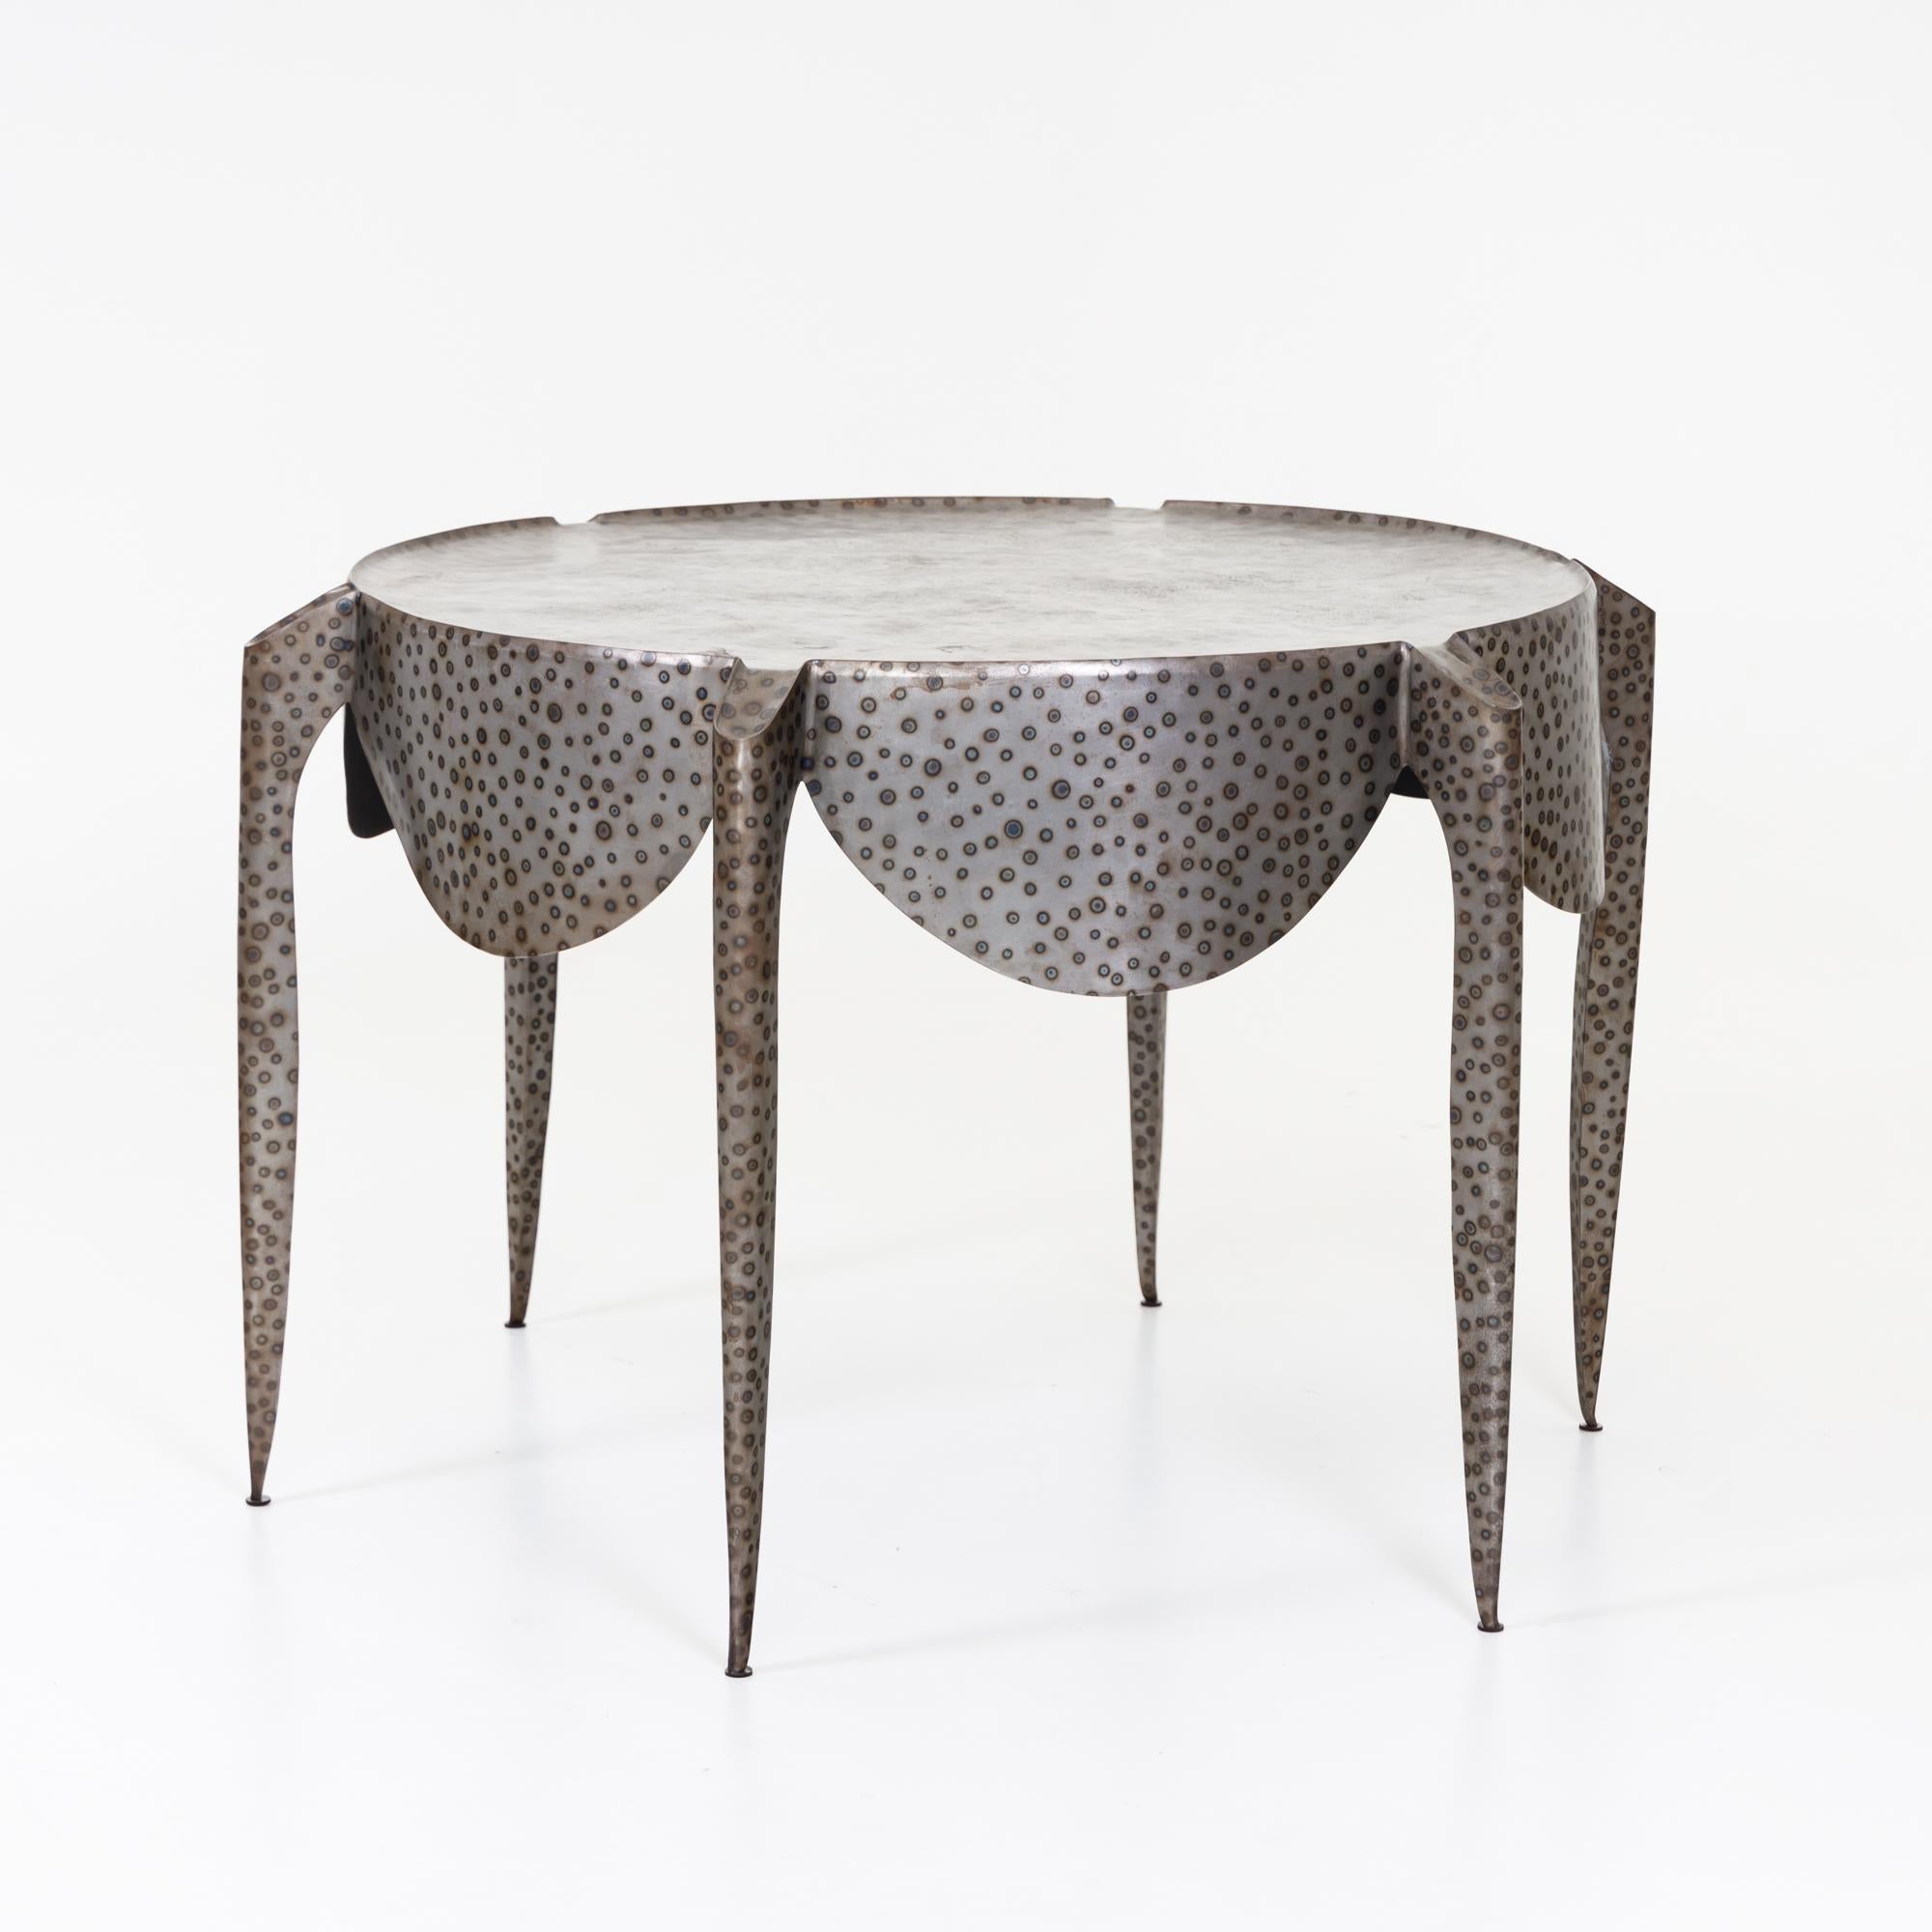 French André Dubreuil (*1951), Paris Table, France, designed in 1988  For Sale